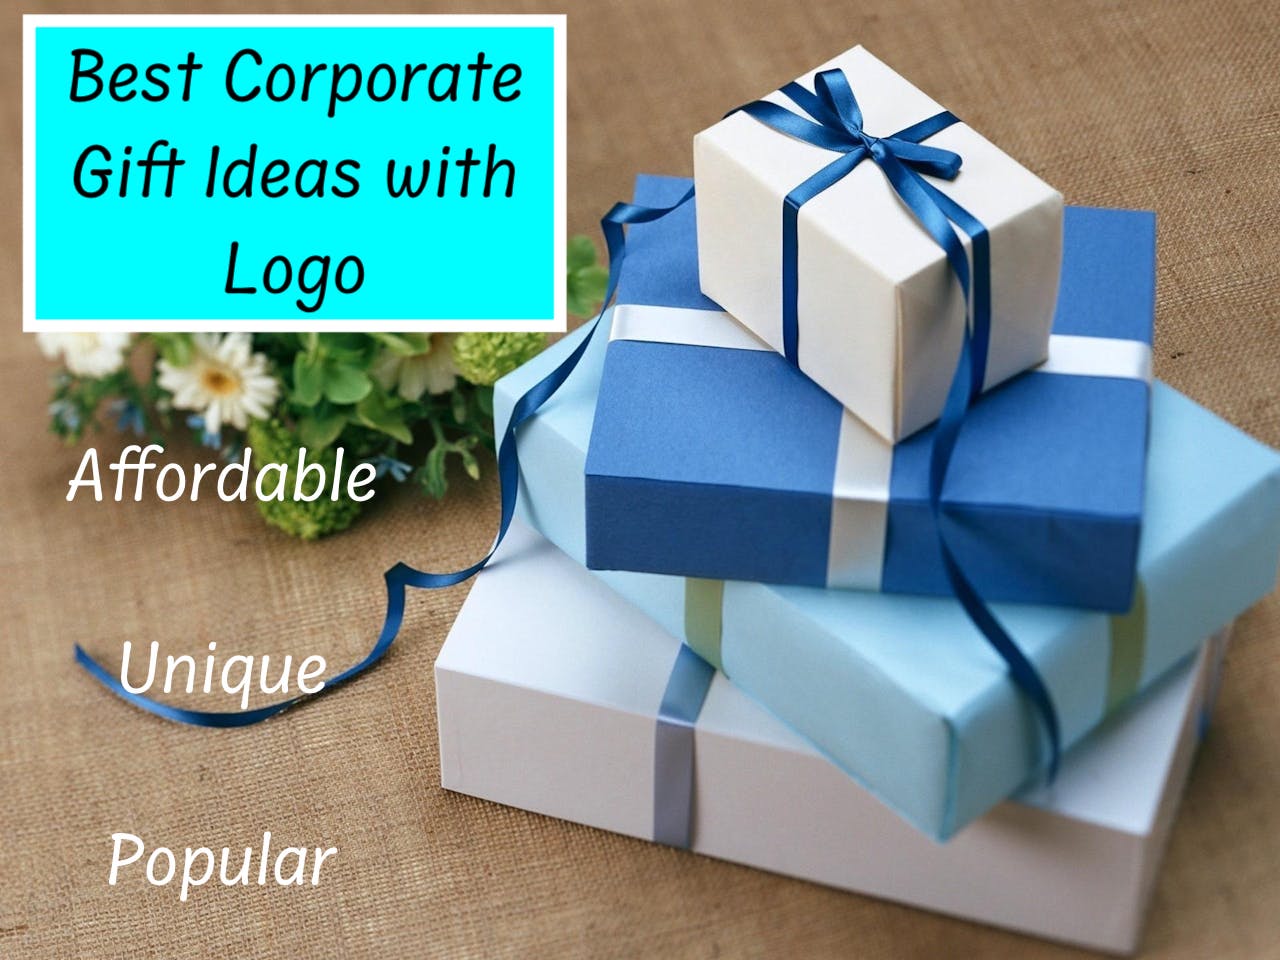 corporate gift with logo, corporate logo gifts, corporate gift ideas with logo